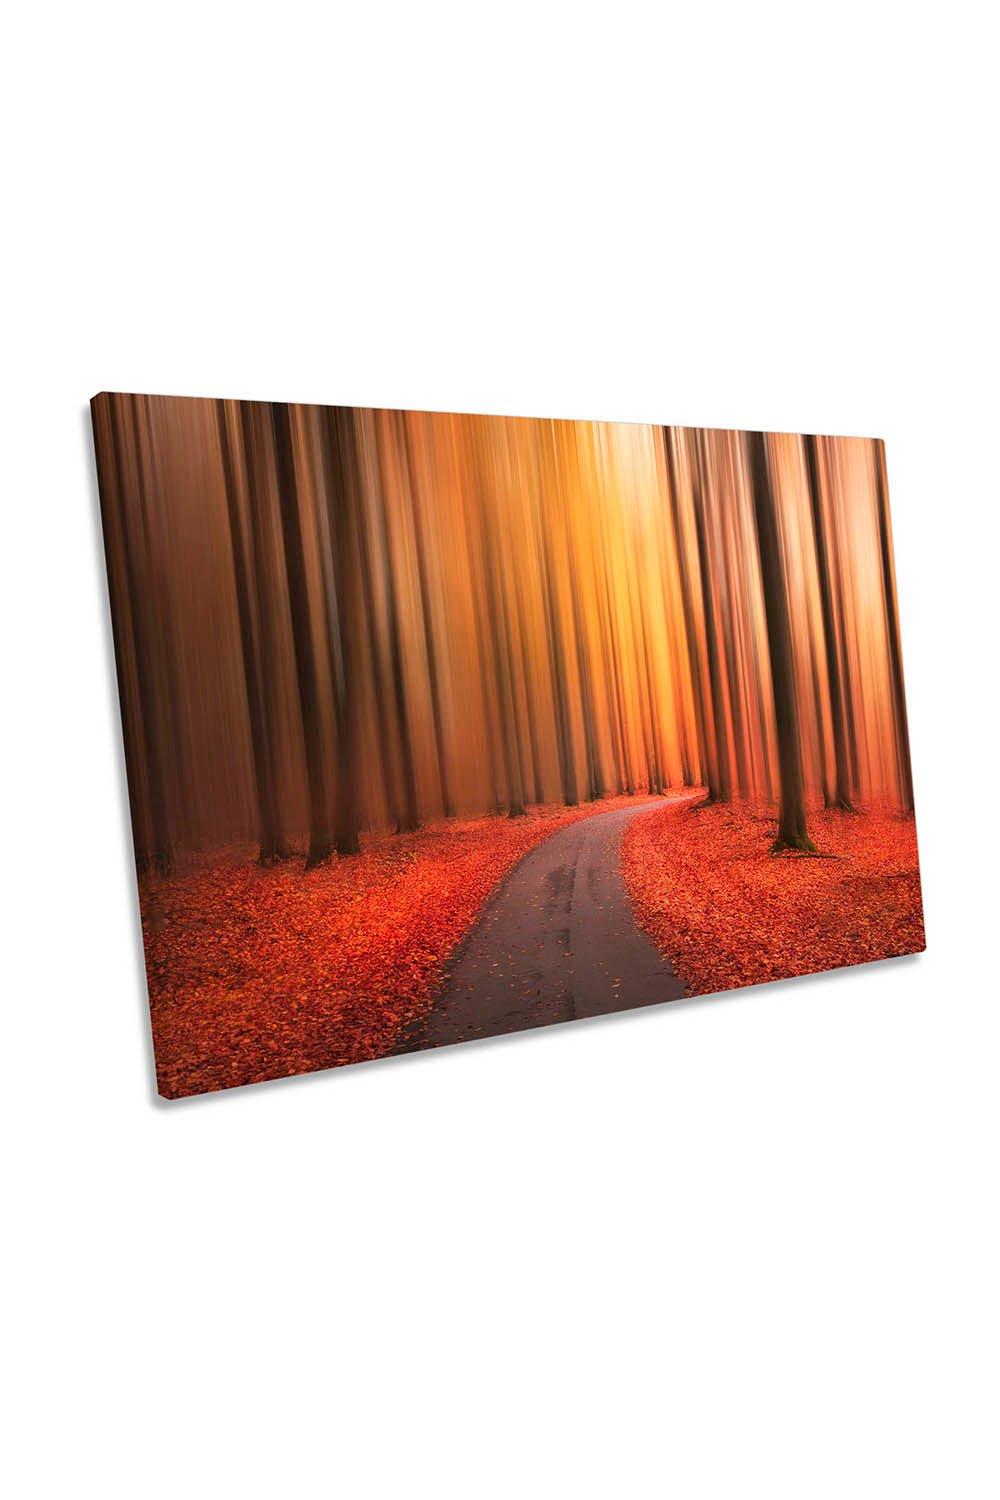 Path to Unknown Orange Abstract Forest Canvas Wall Art Picture Print